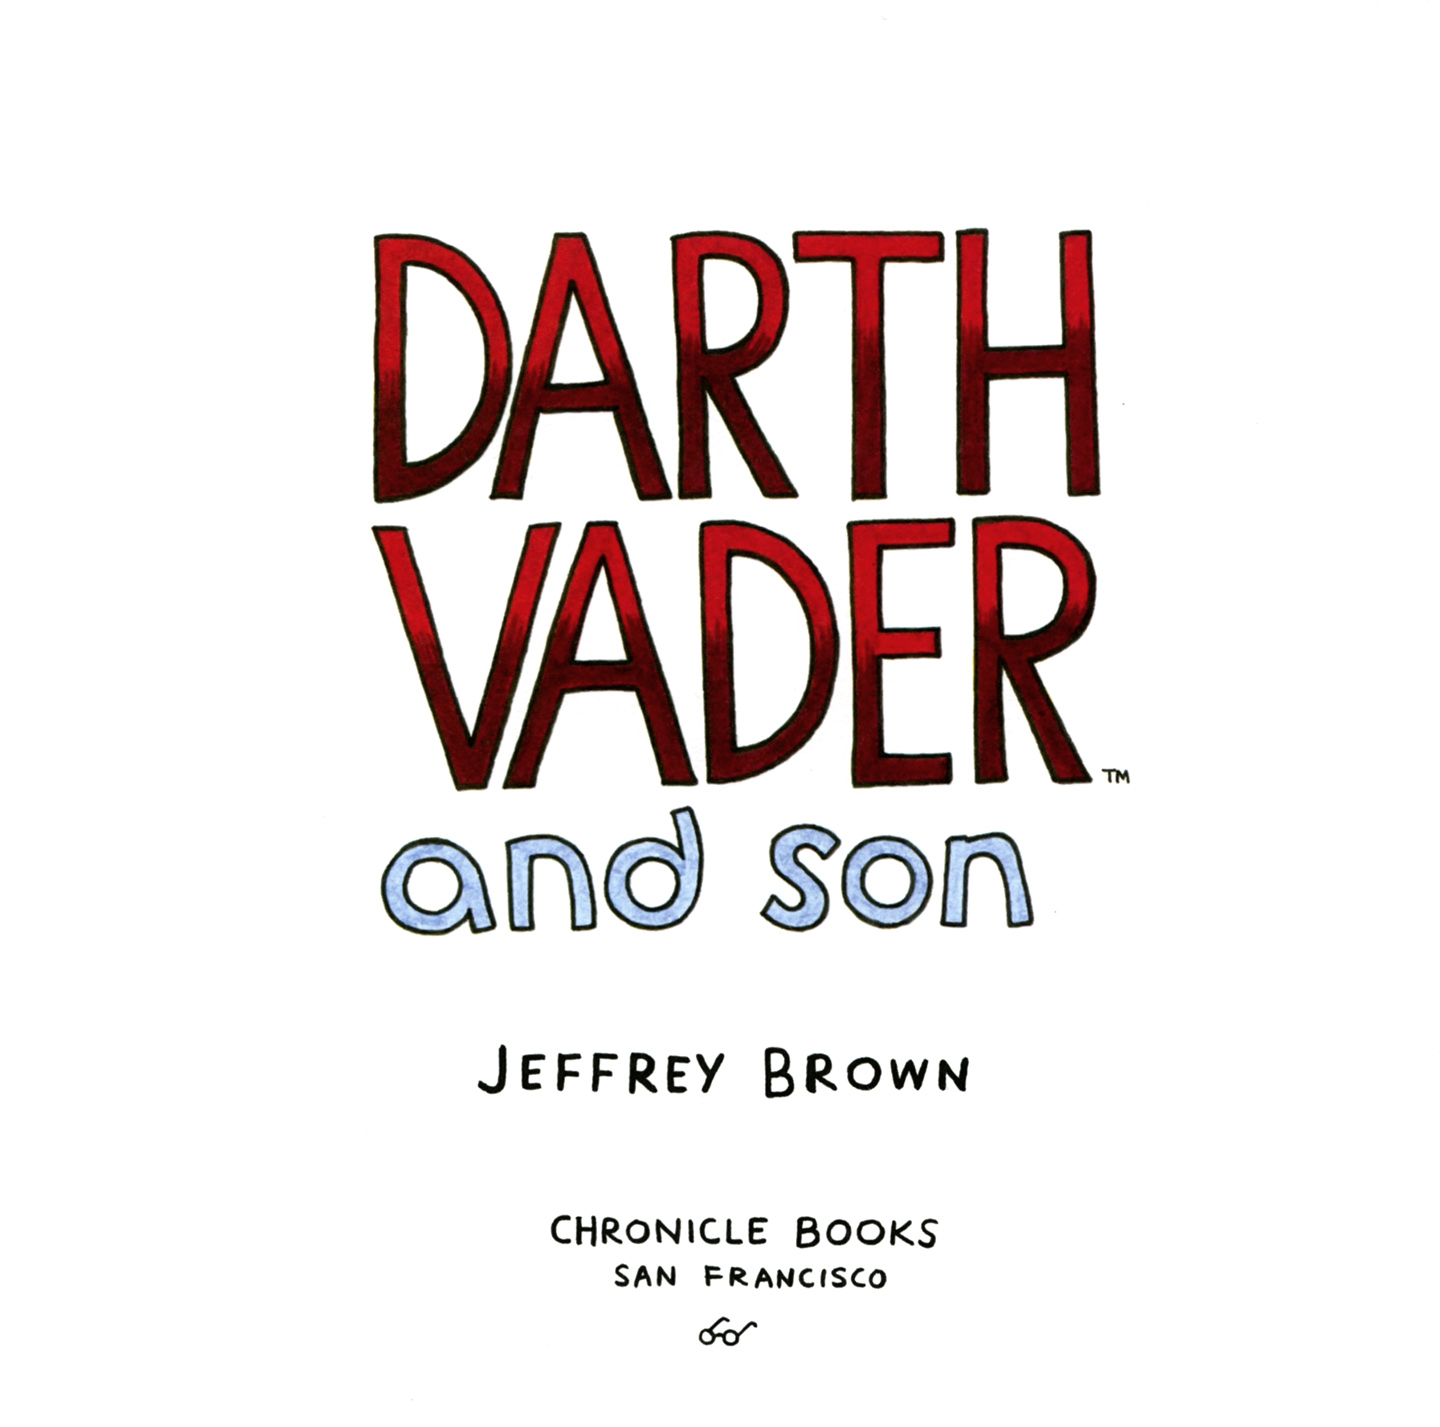 Read online Star Wars: Darth Vader and Son comic -  Issue # TPB - 6